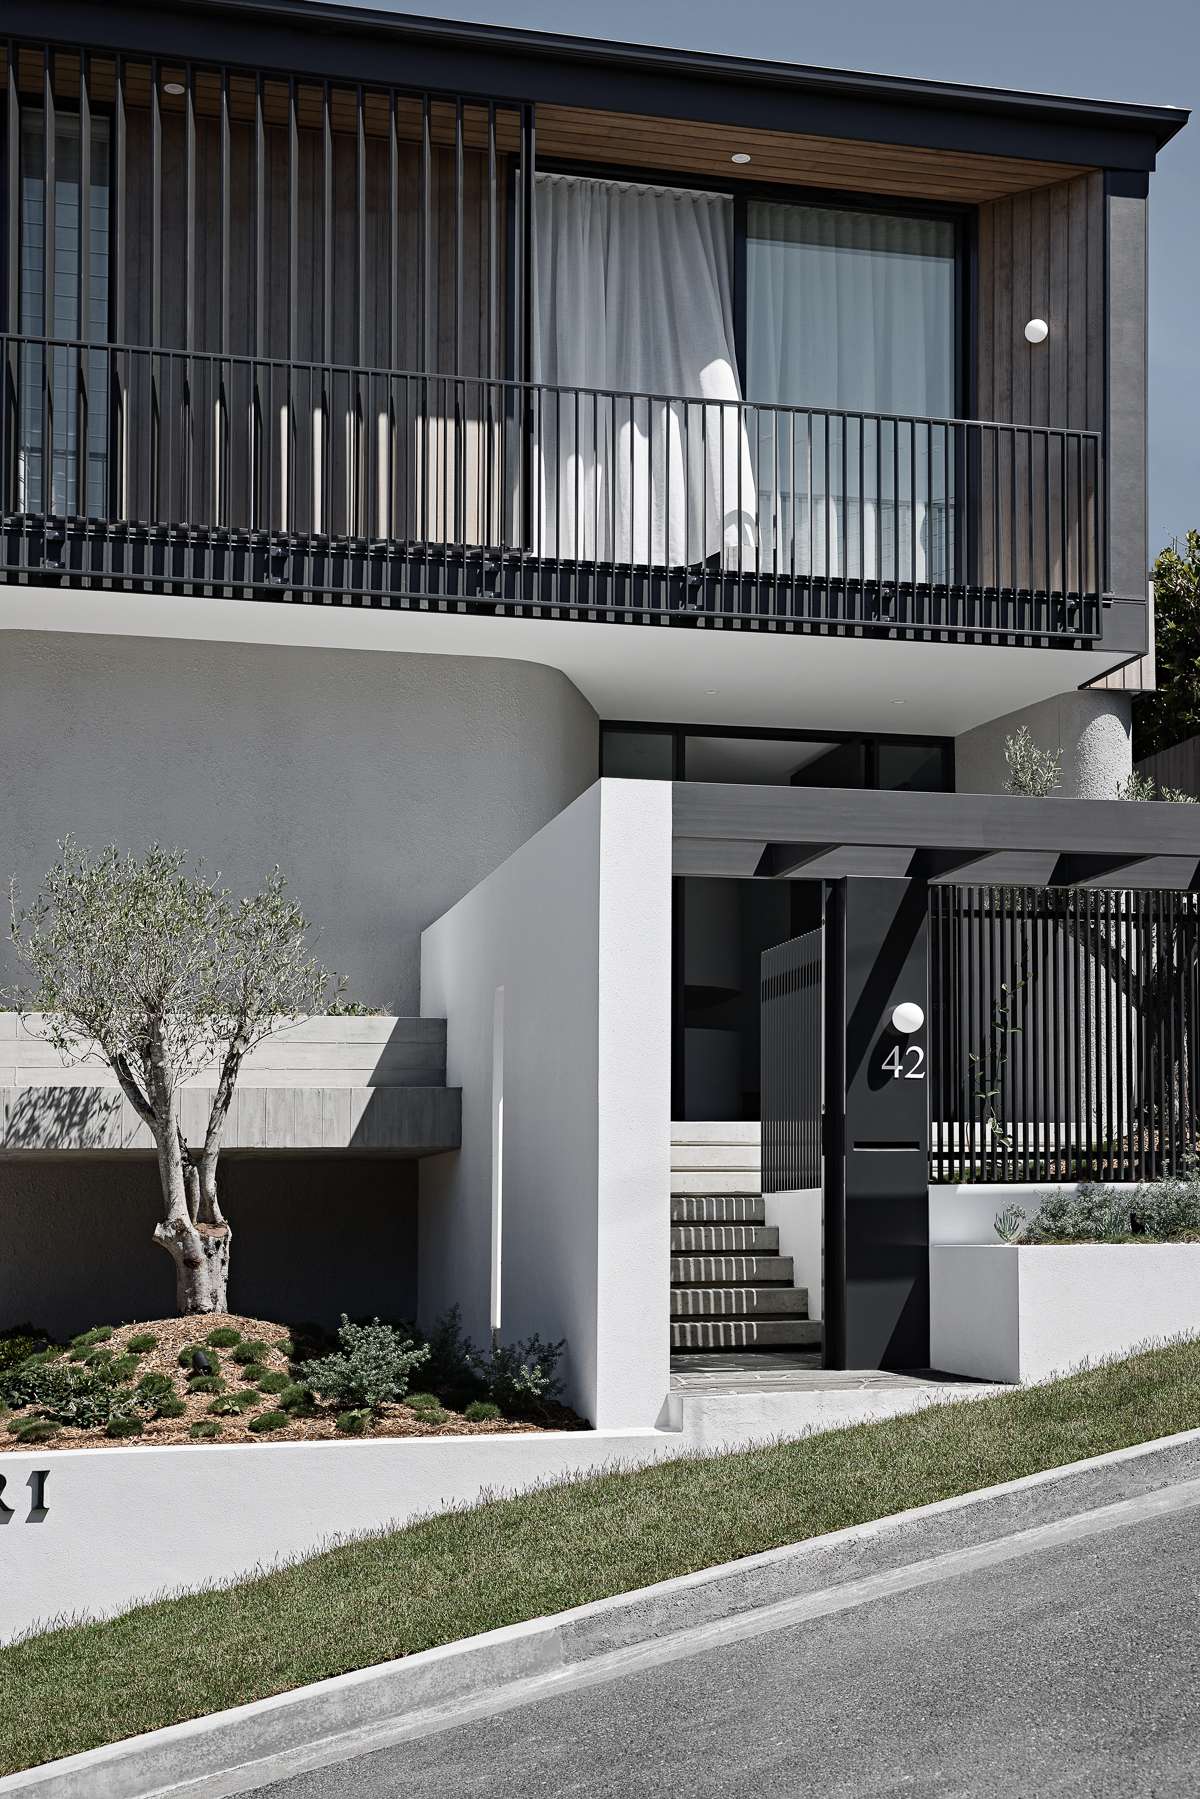 Amiri Courtyard House by Kelder Architects showing entry sequence from the street